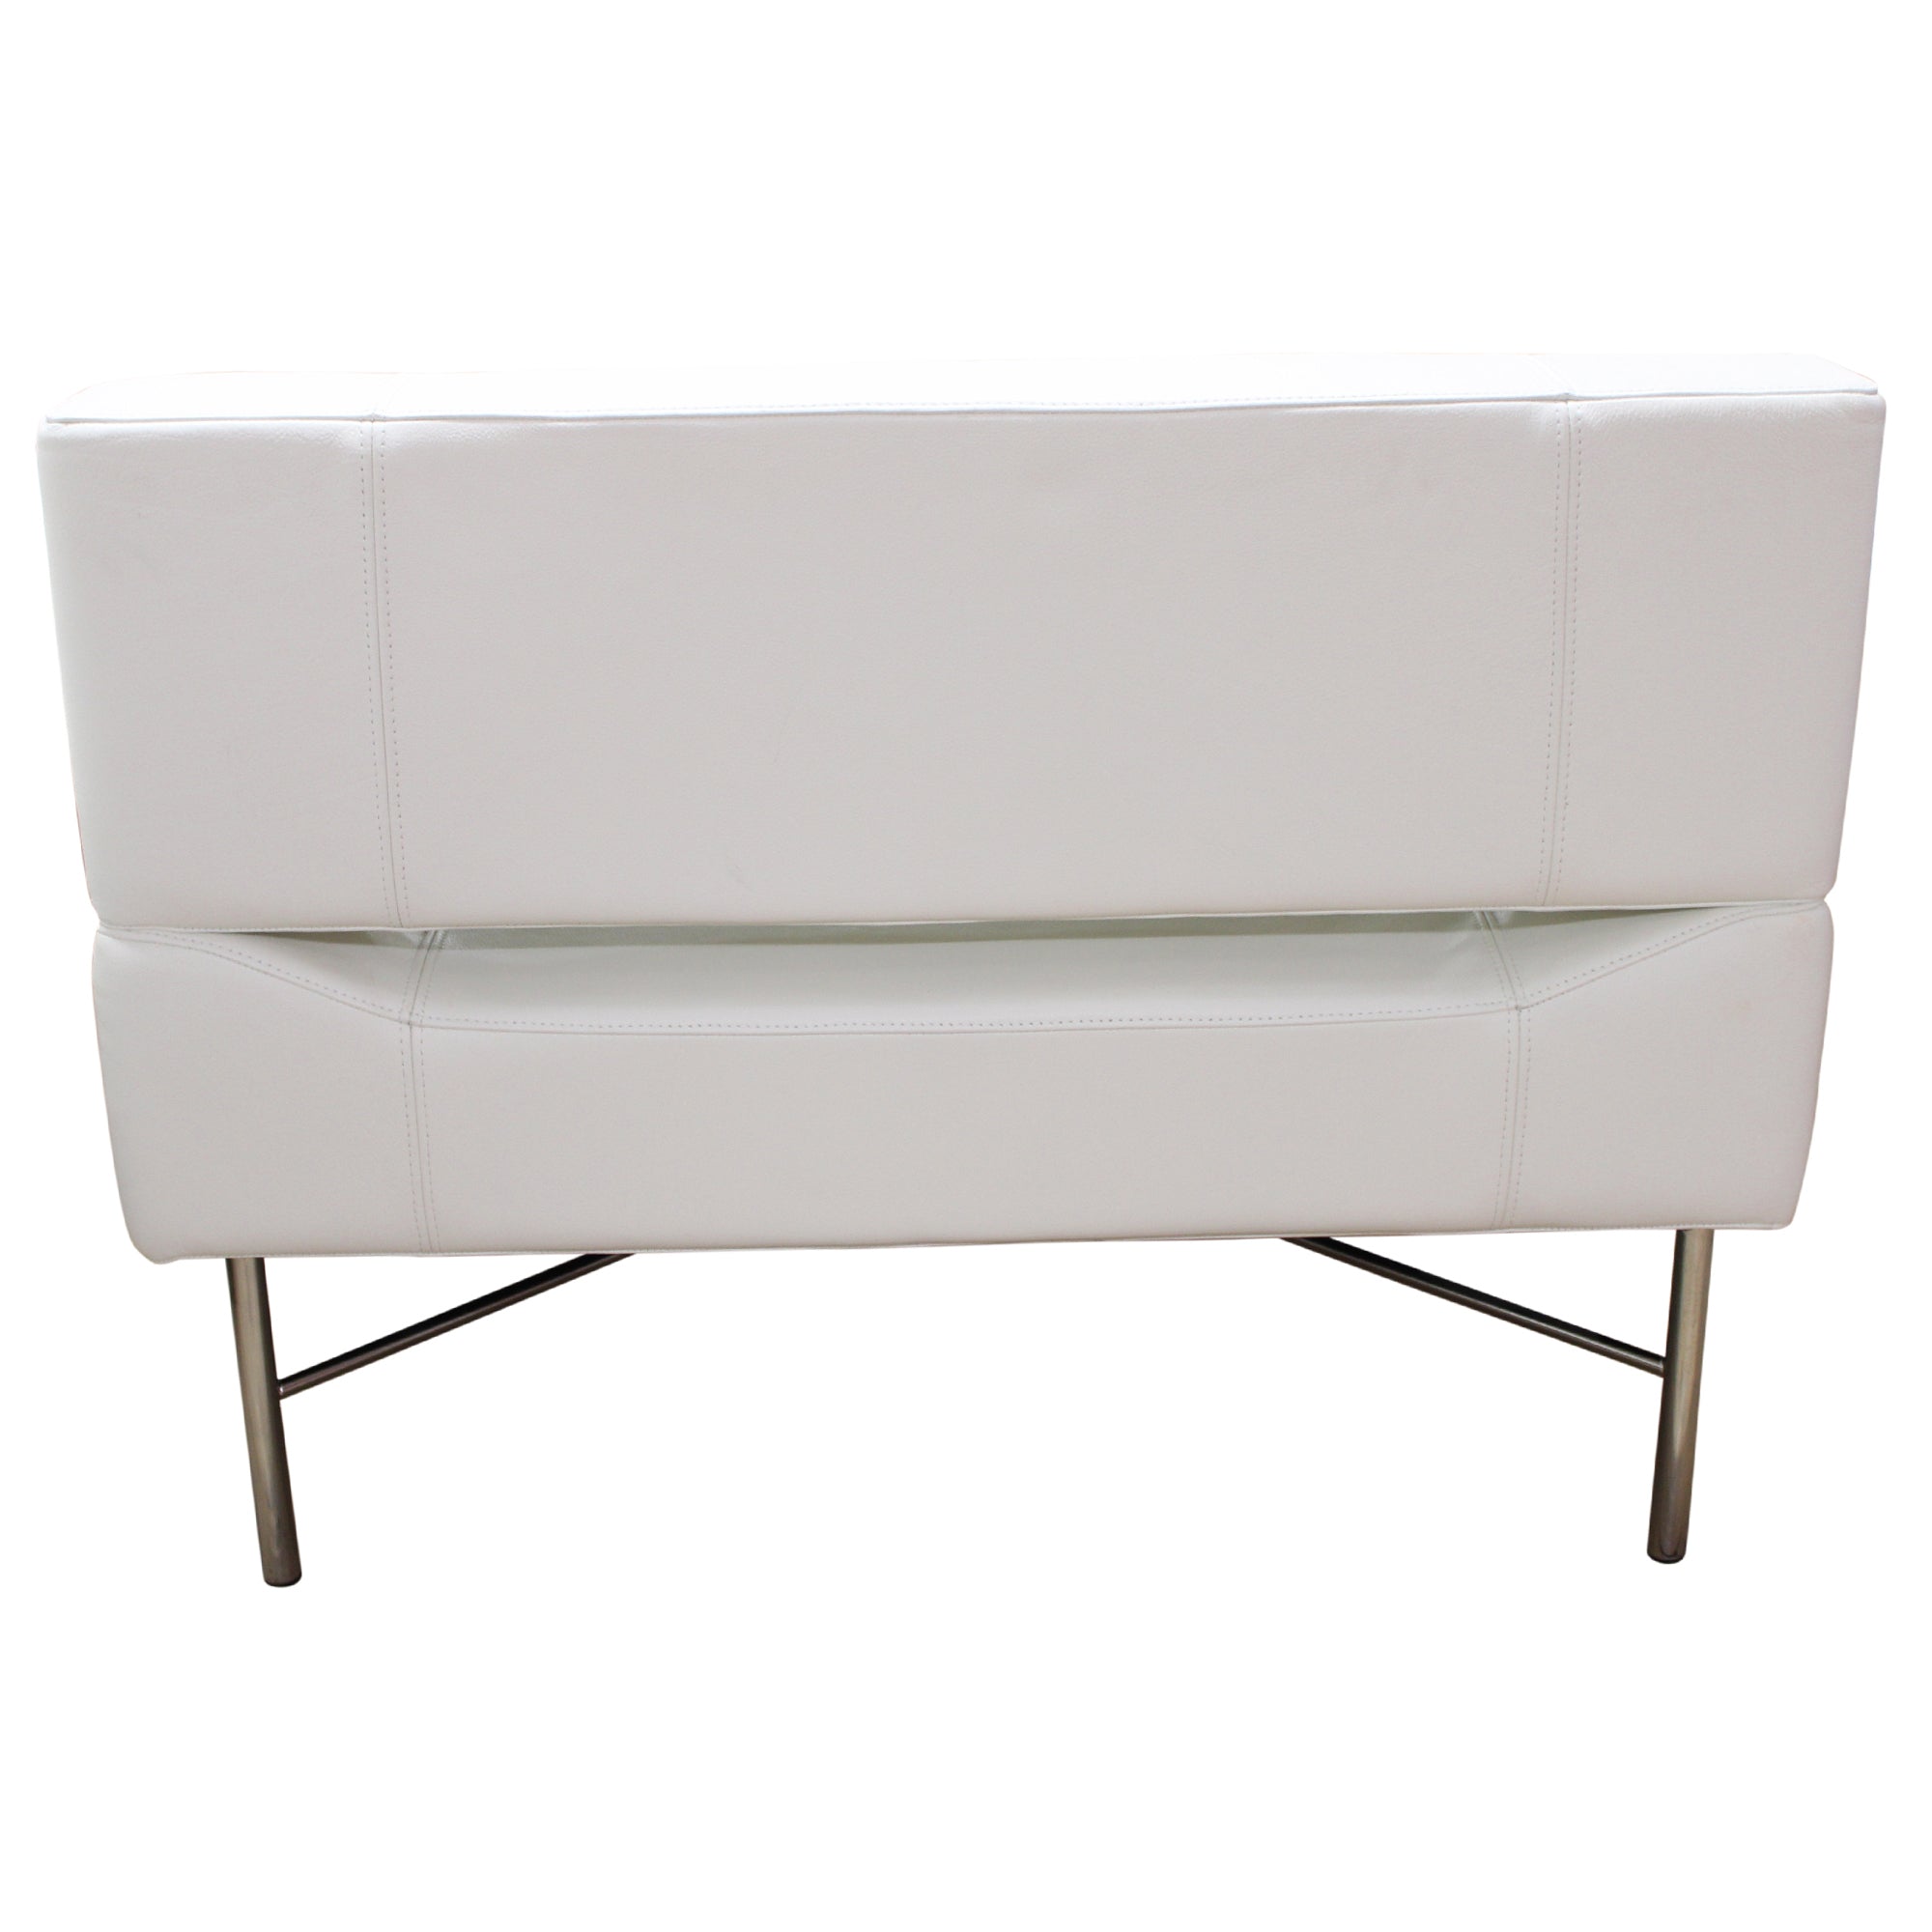 Boxcar Lounge Chair by Keilhauer - White - Preowned